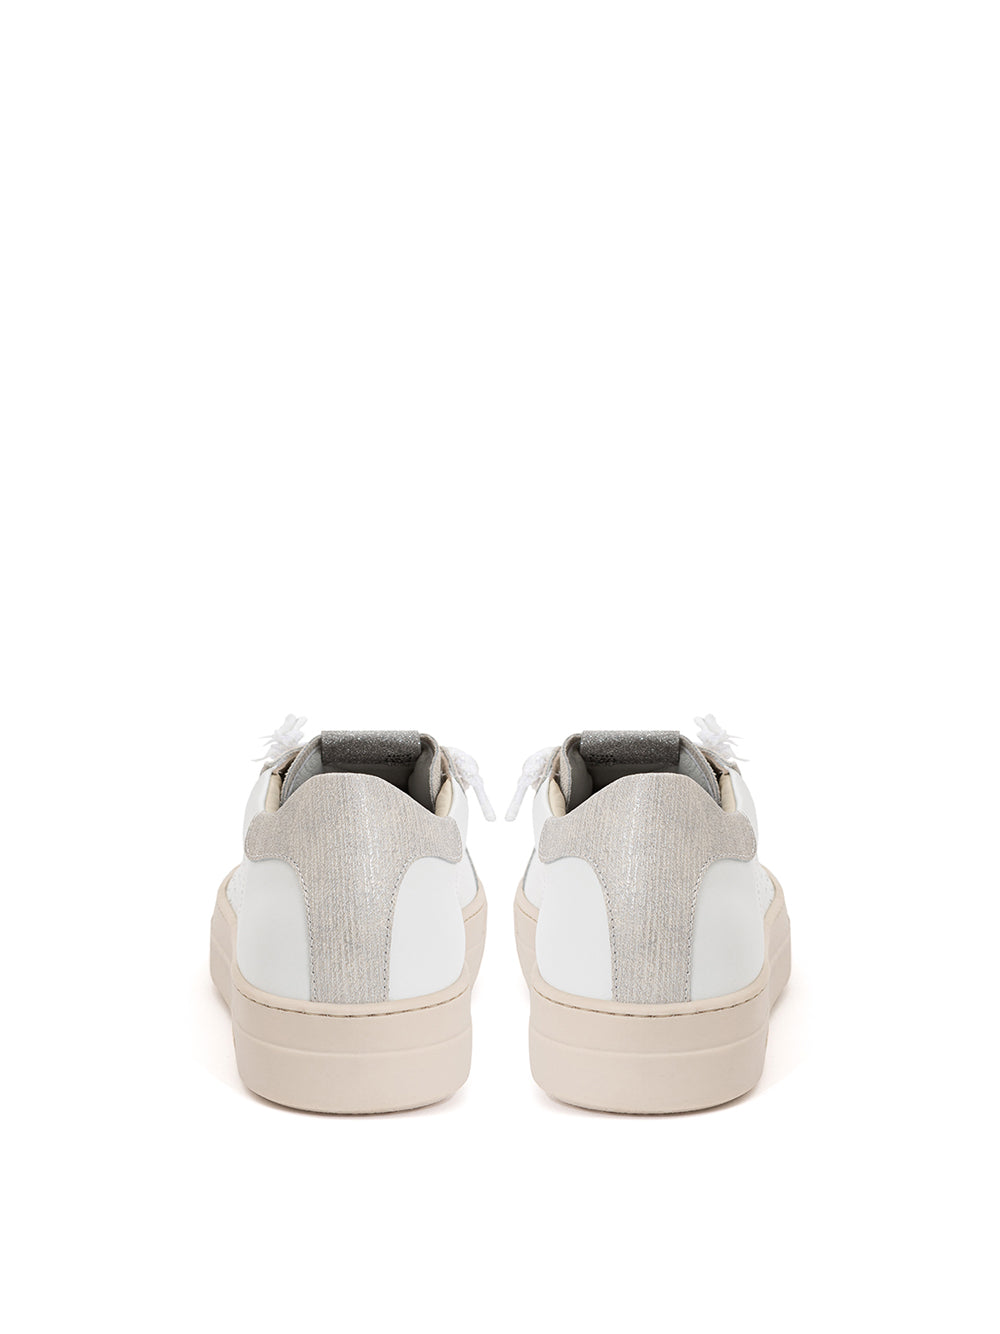 White Thea P448 leather sneakers